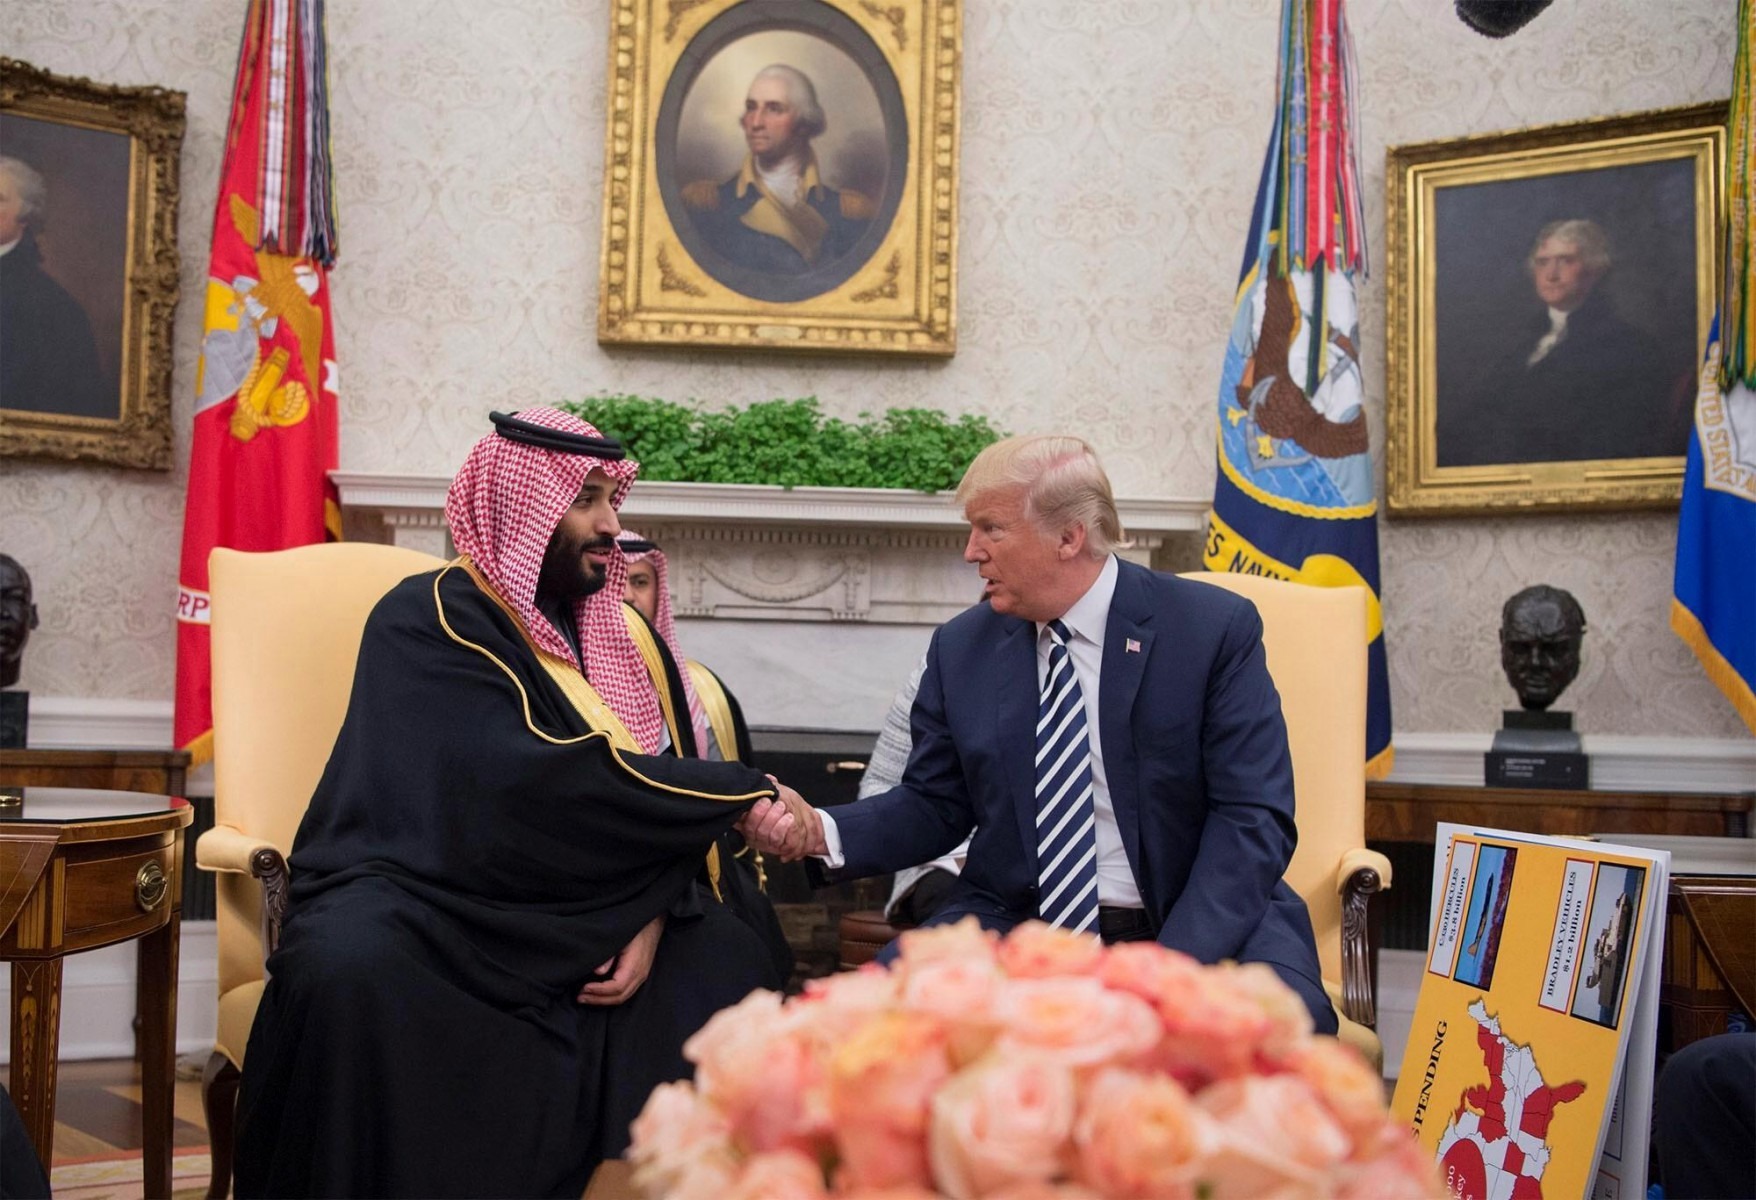 , Man Utd potential buyer Mohammed bin Salman is pals with Donald Trump and owns worlds most expensive home